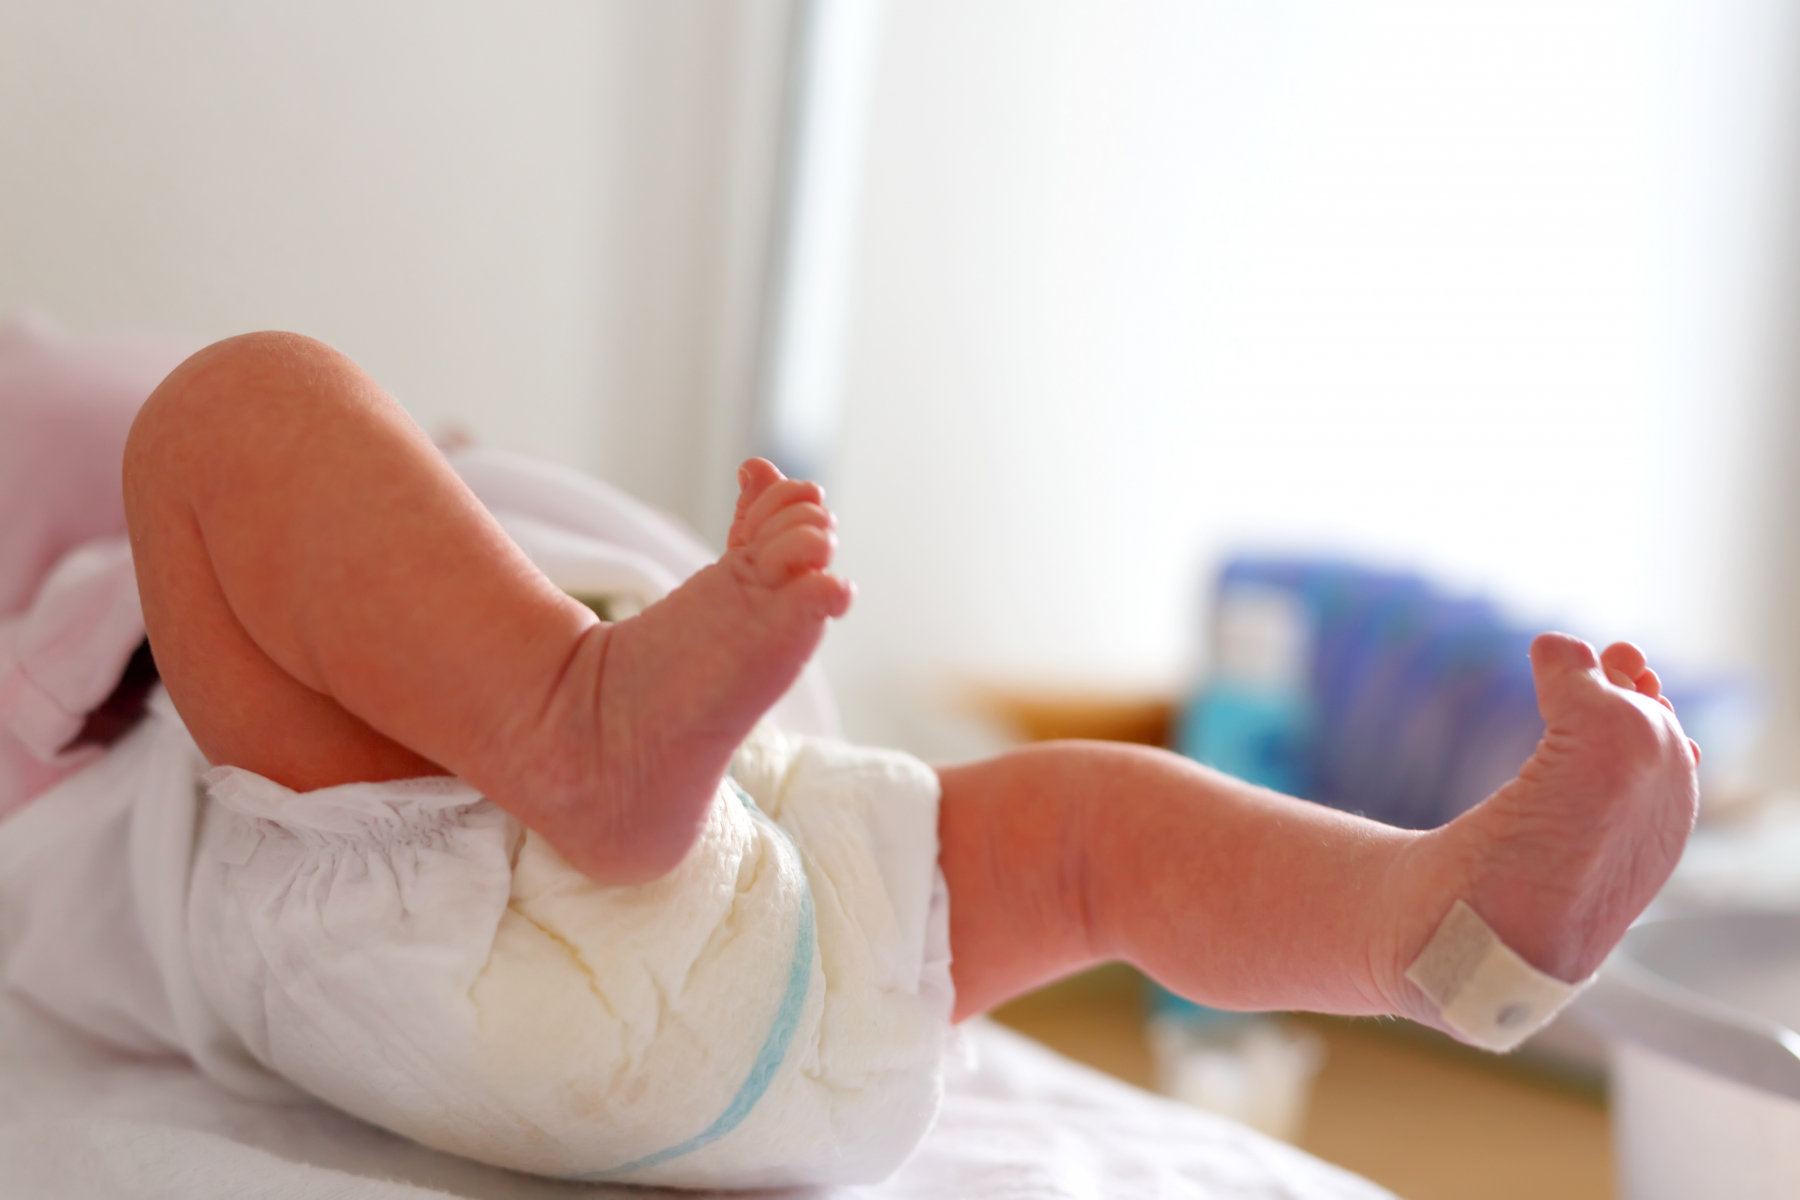 A newborn baby with a plaster on its heel